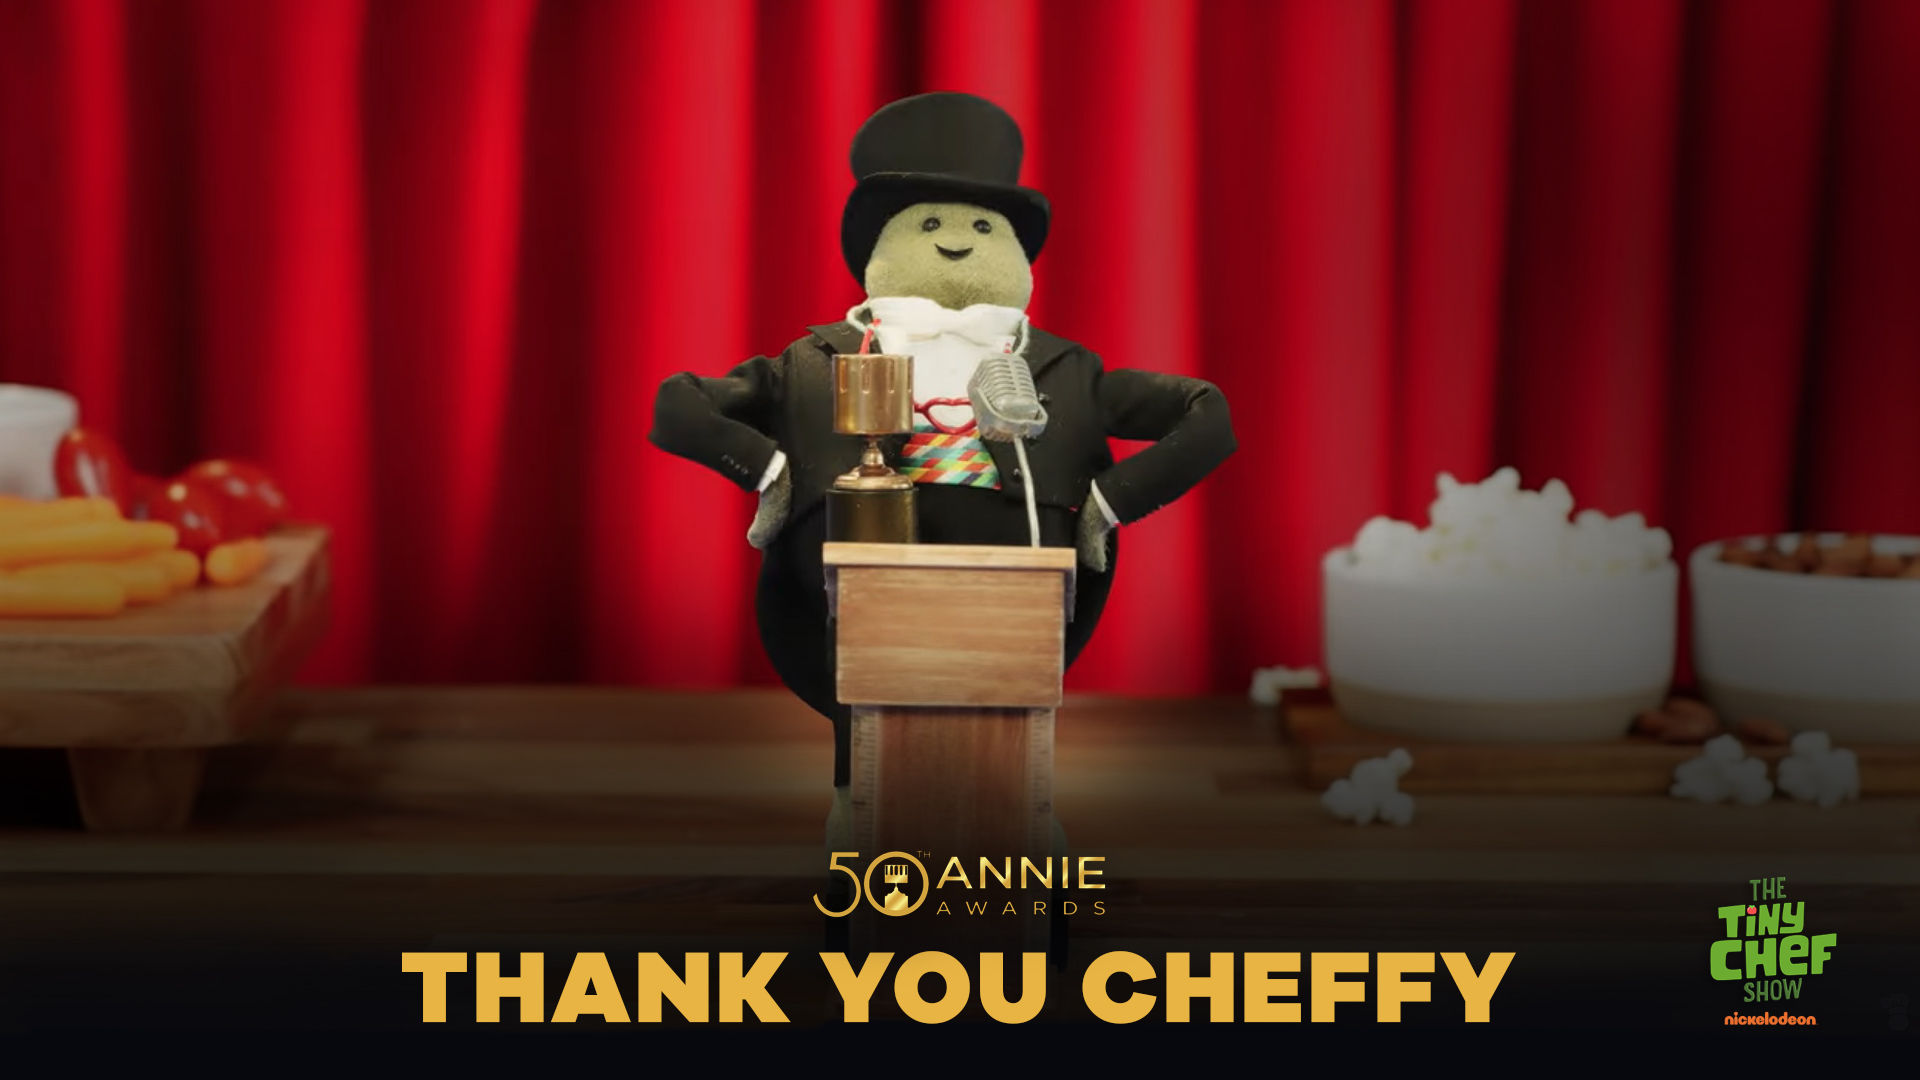 Check out Chef’s acceptance speech at the 50TH Annie Awards!